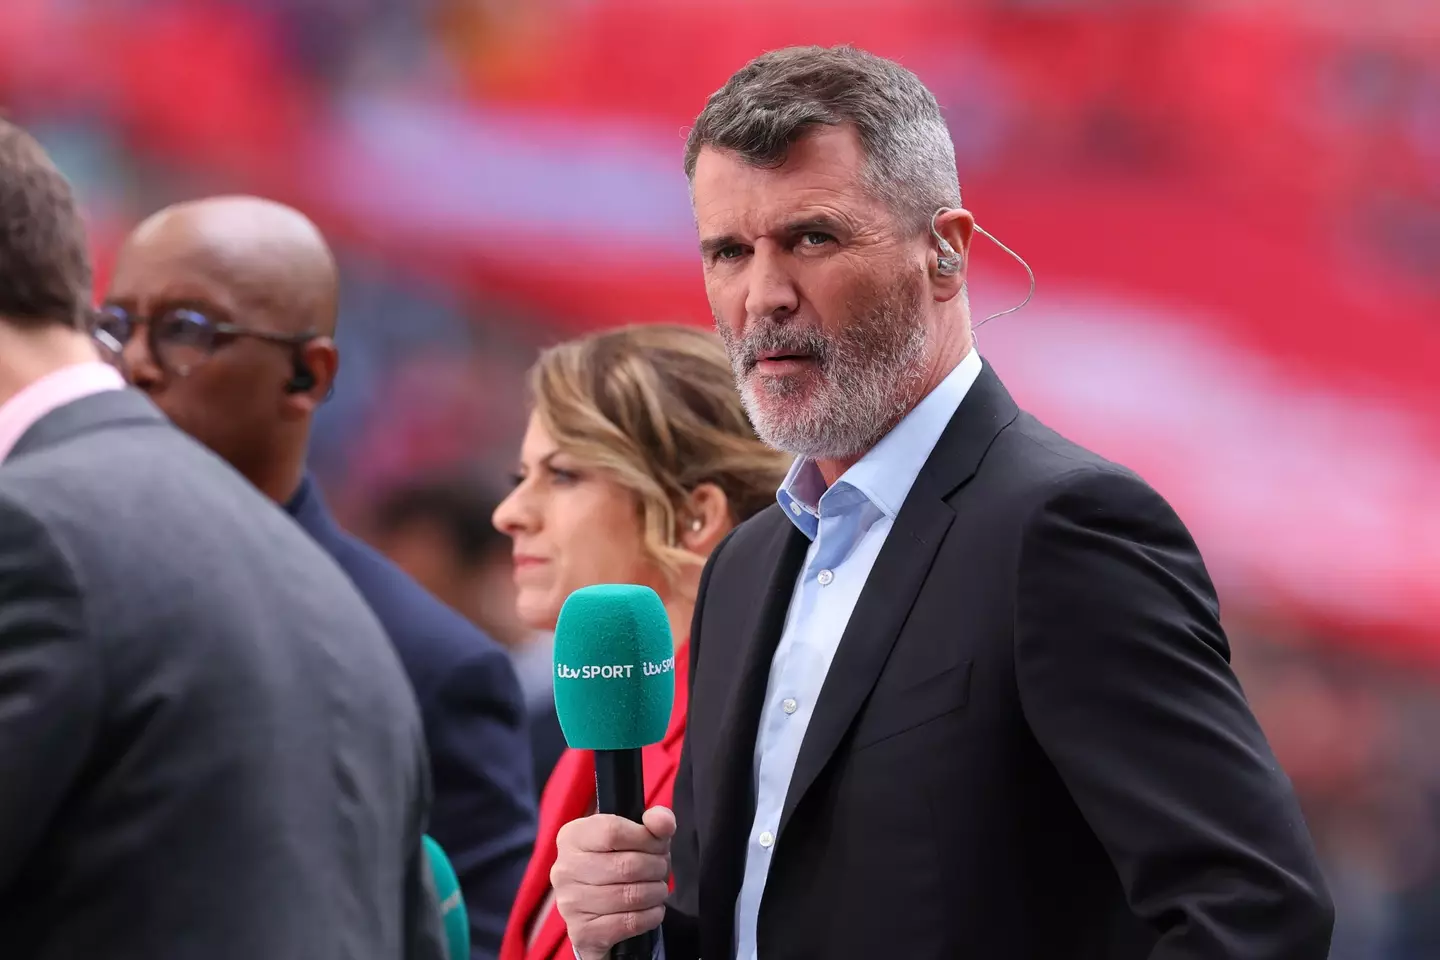 Keane was at Wembley on Saturday. Image: Alamy